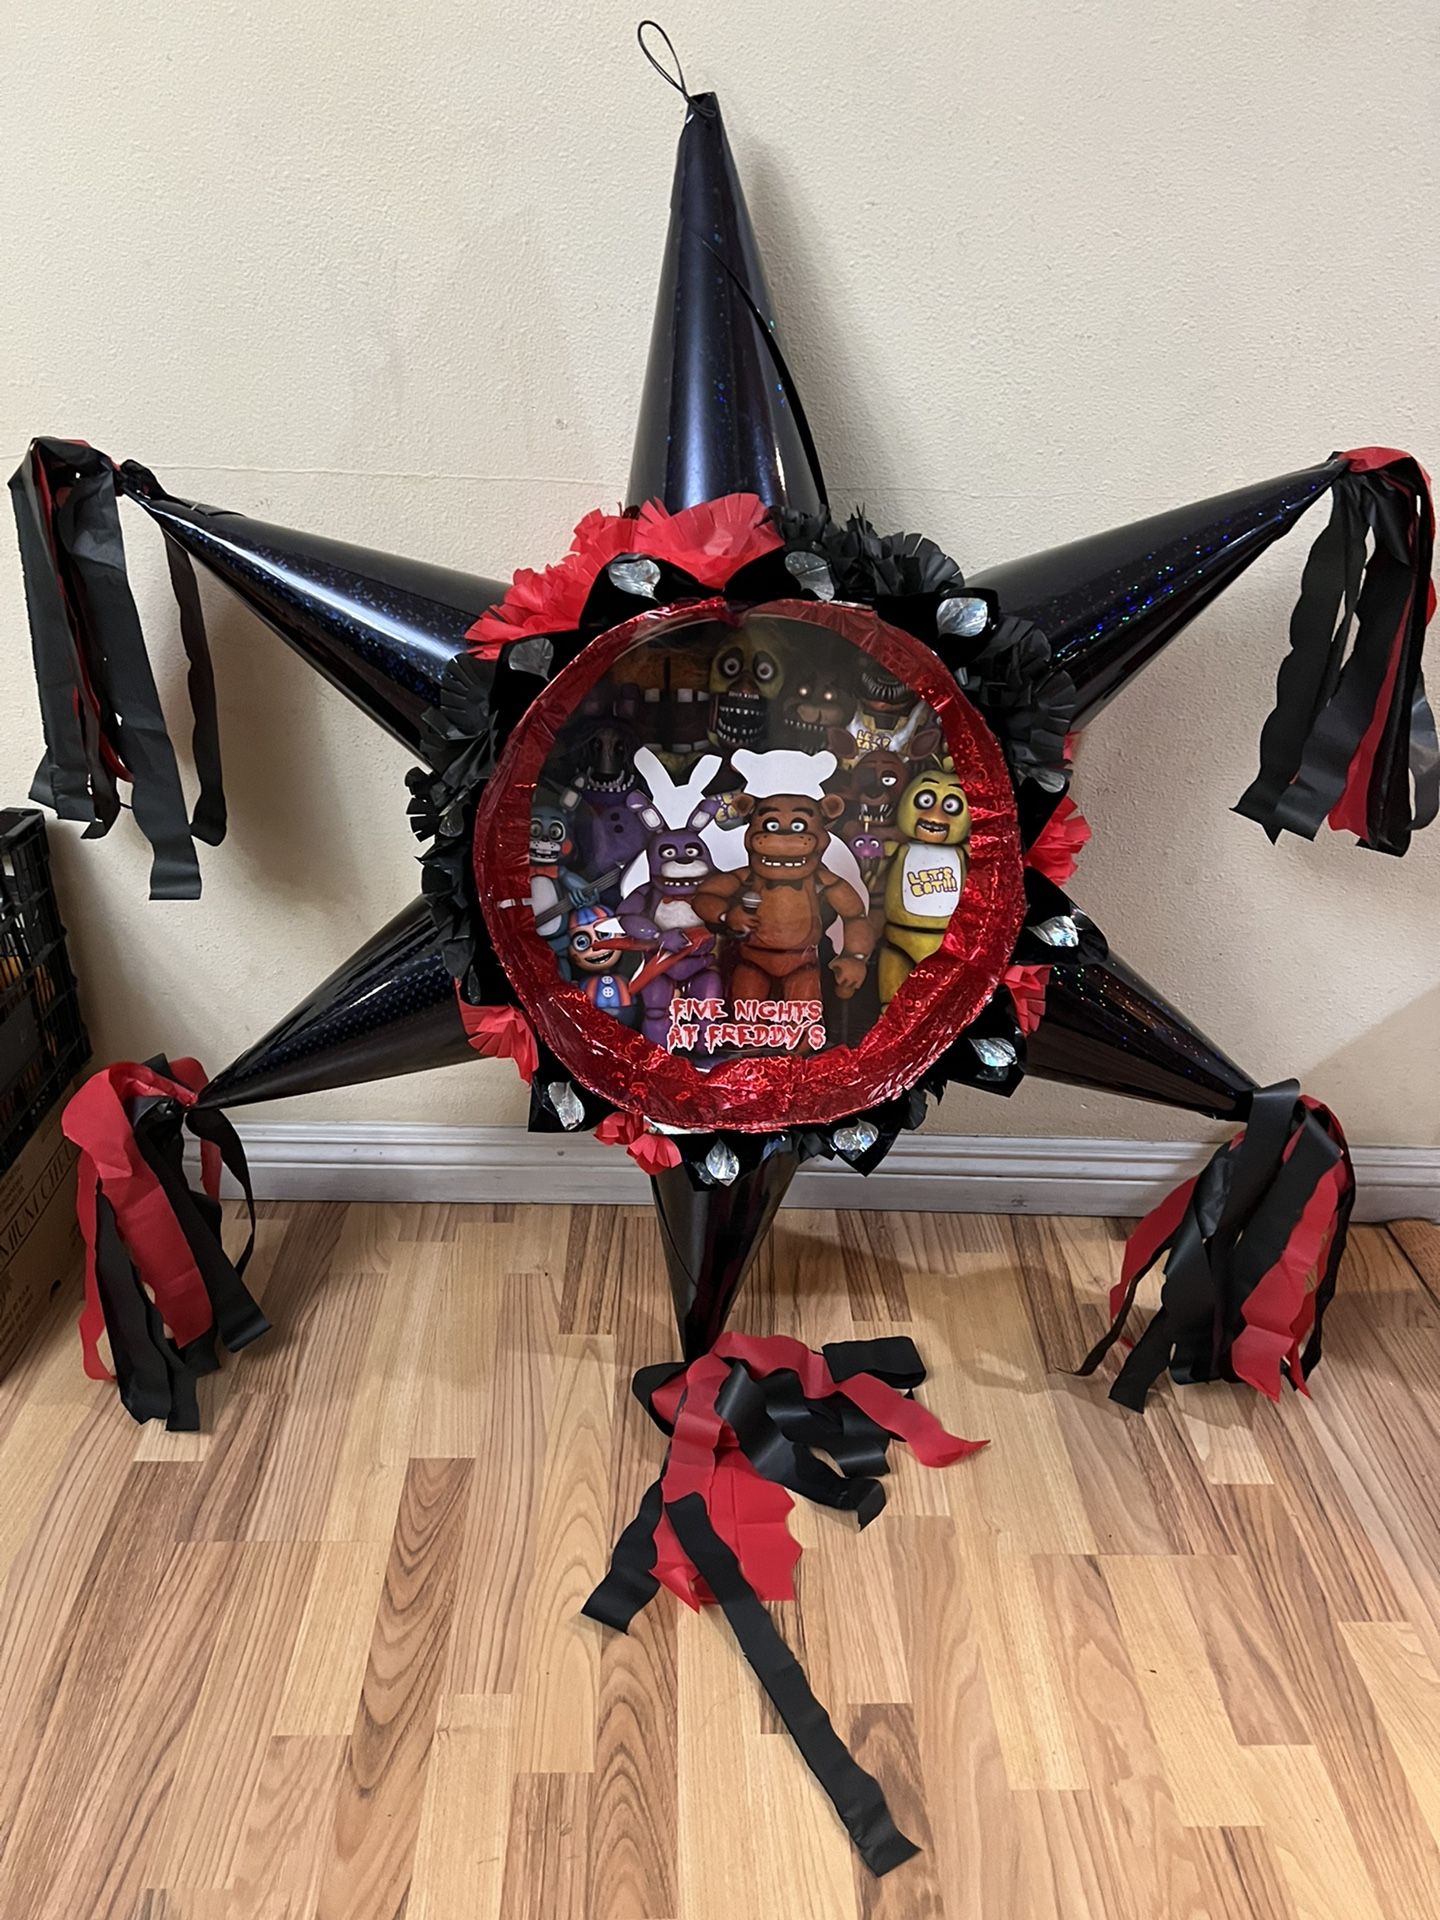 Five Nights At Freddy’s Decorations for Sale in El Monte, CA - OfferUp